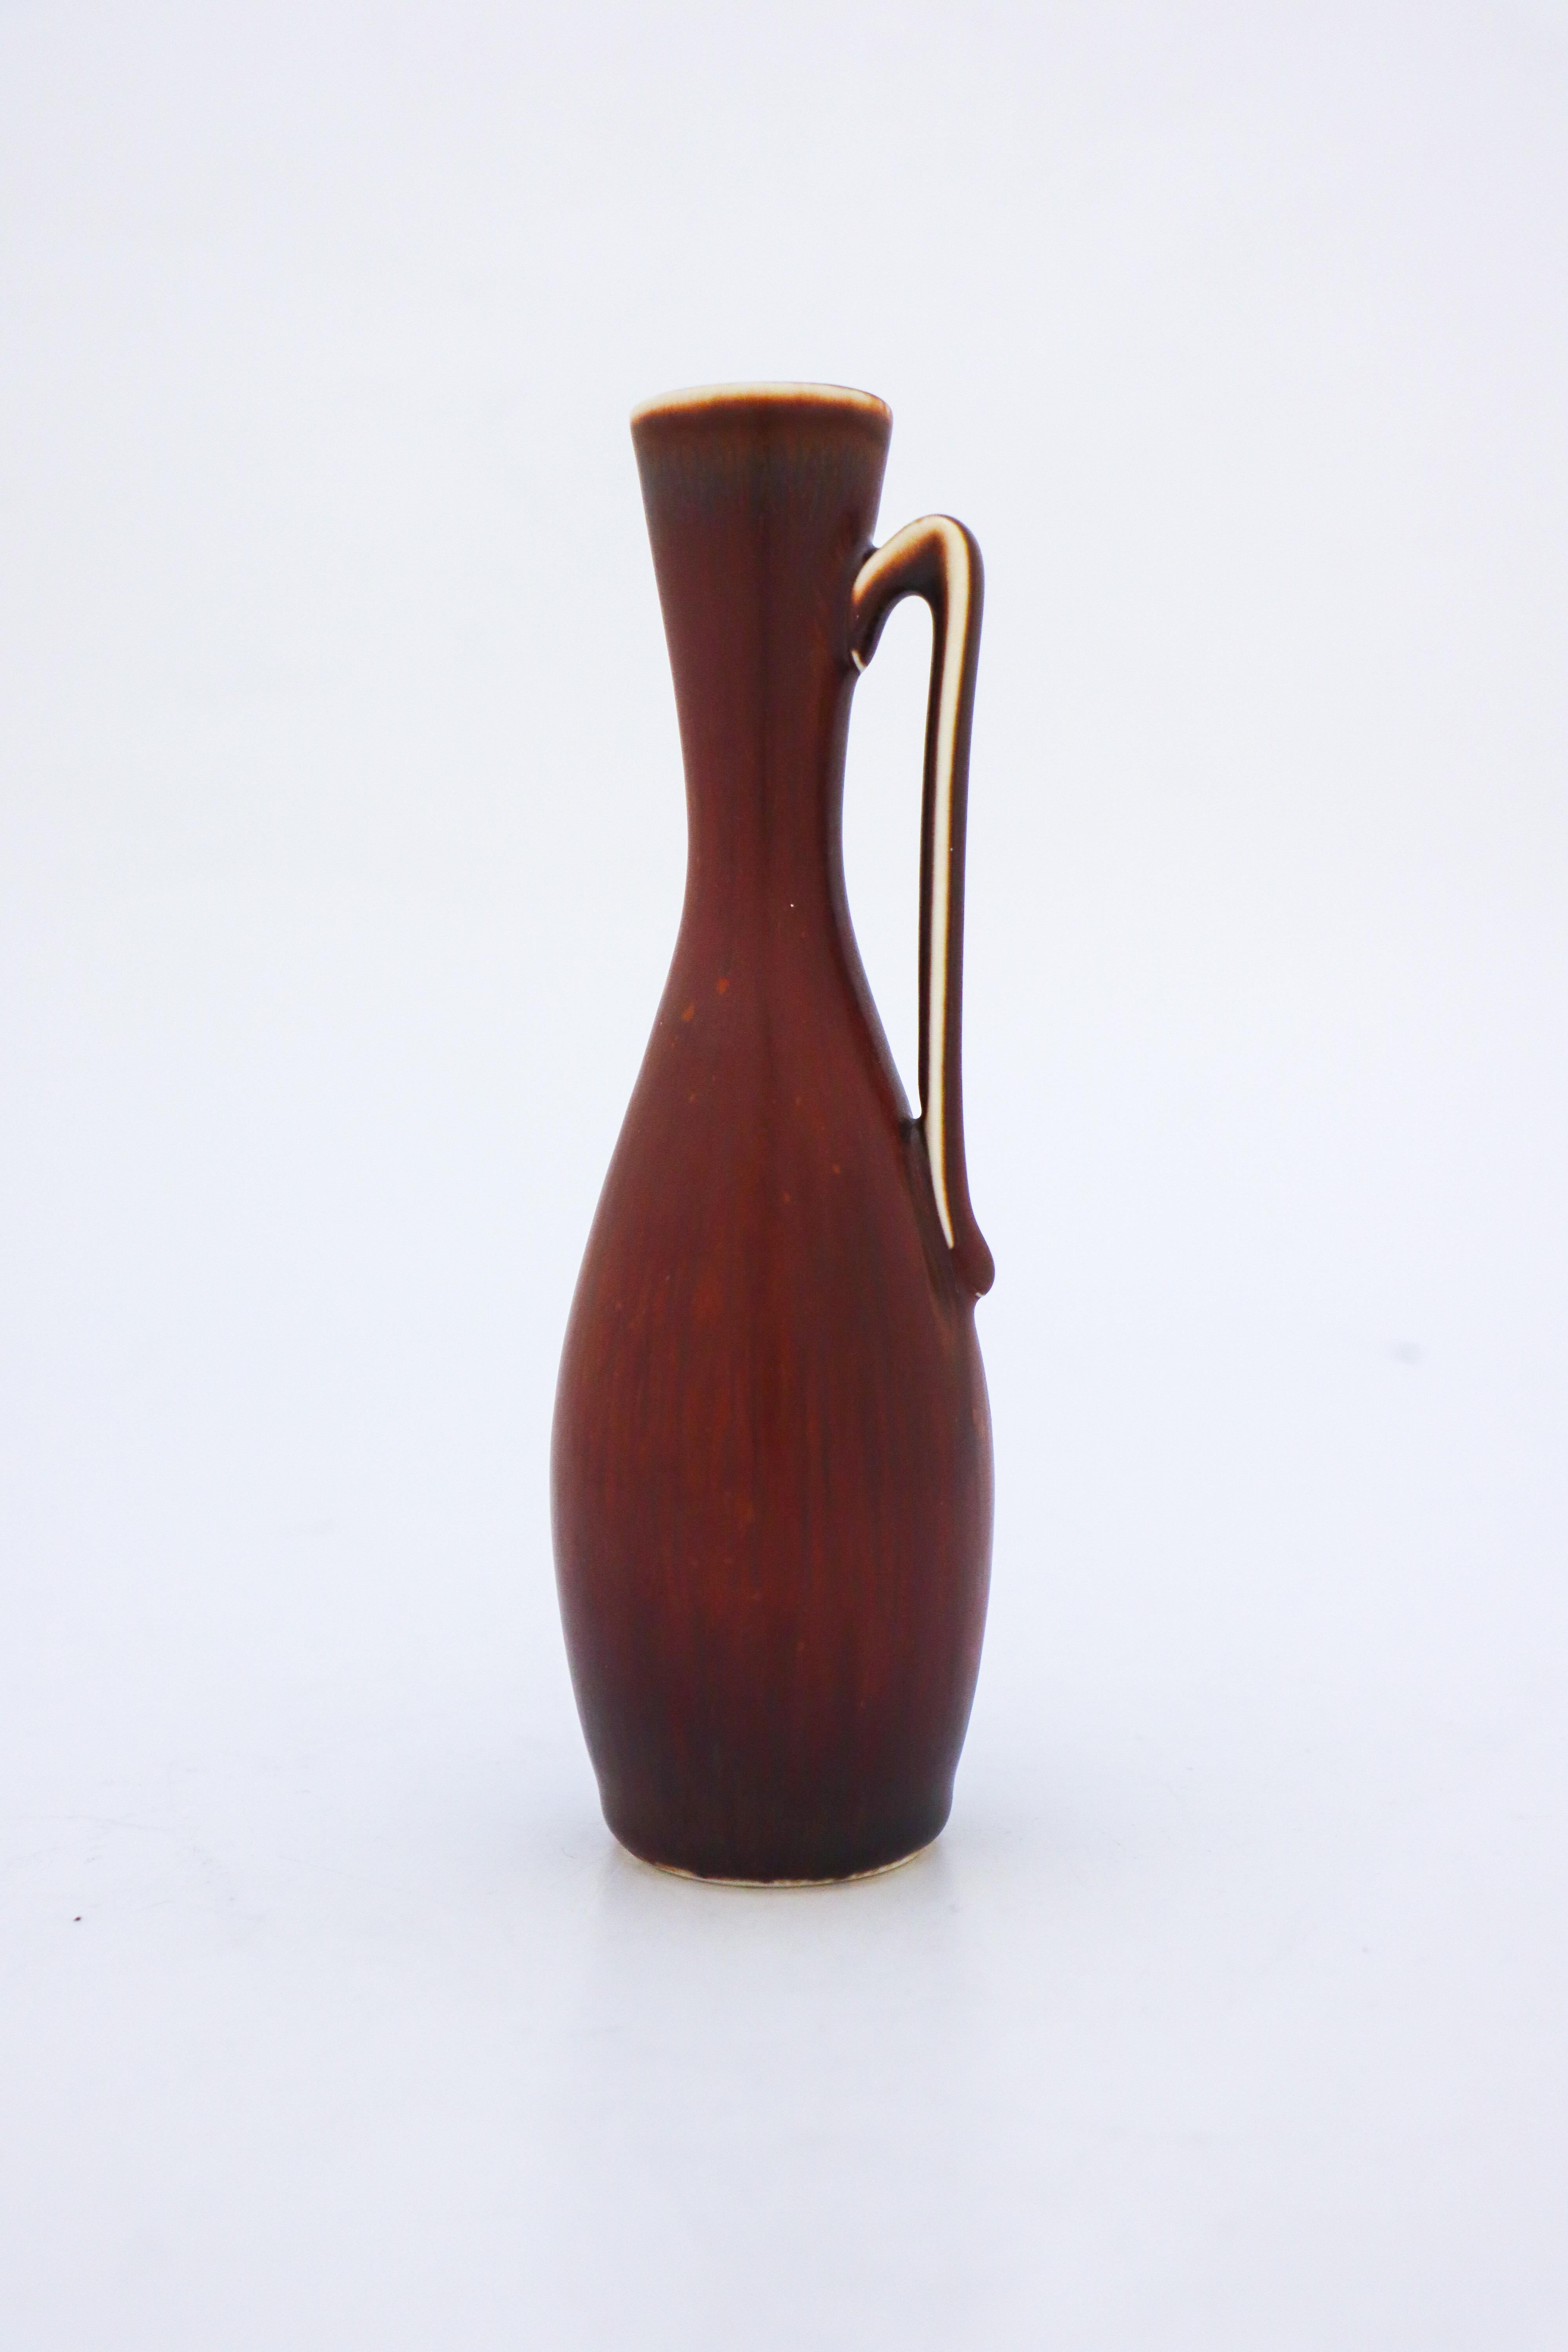 A brown vase designed by Gunnar Nylund at Rörstrand, it´s 17.5 cm (7) high. It´s in mint condition and marked as 1:st quality. 

Gunnar Nylund was born in Paris 1904 with parents who worked as sculptors and designer so he really soon started hos